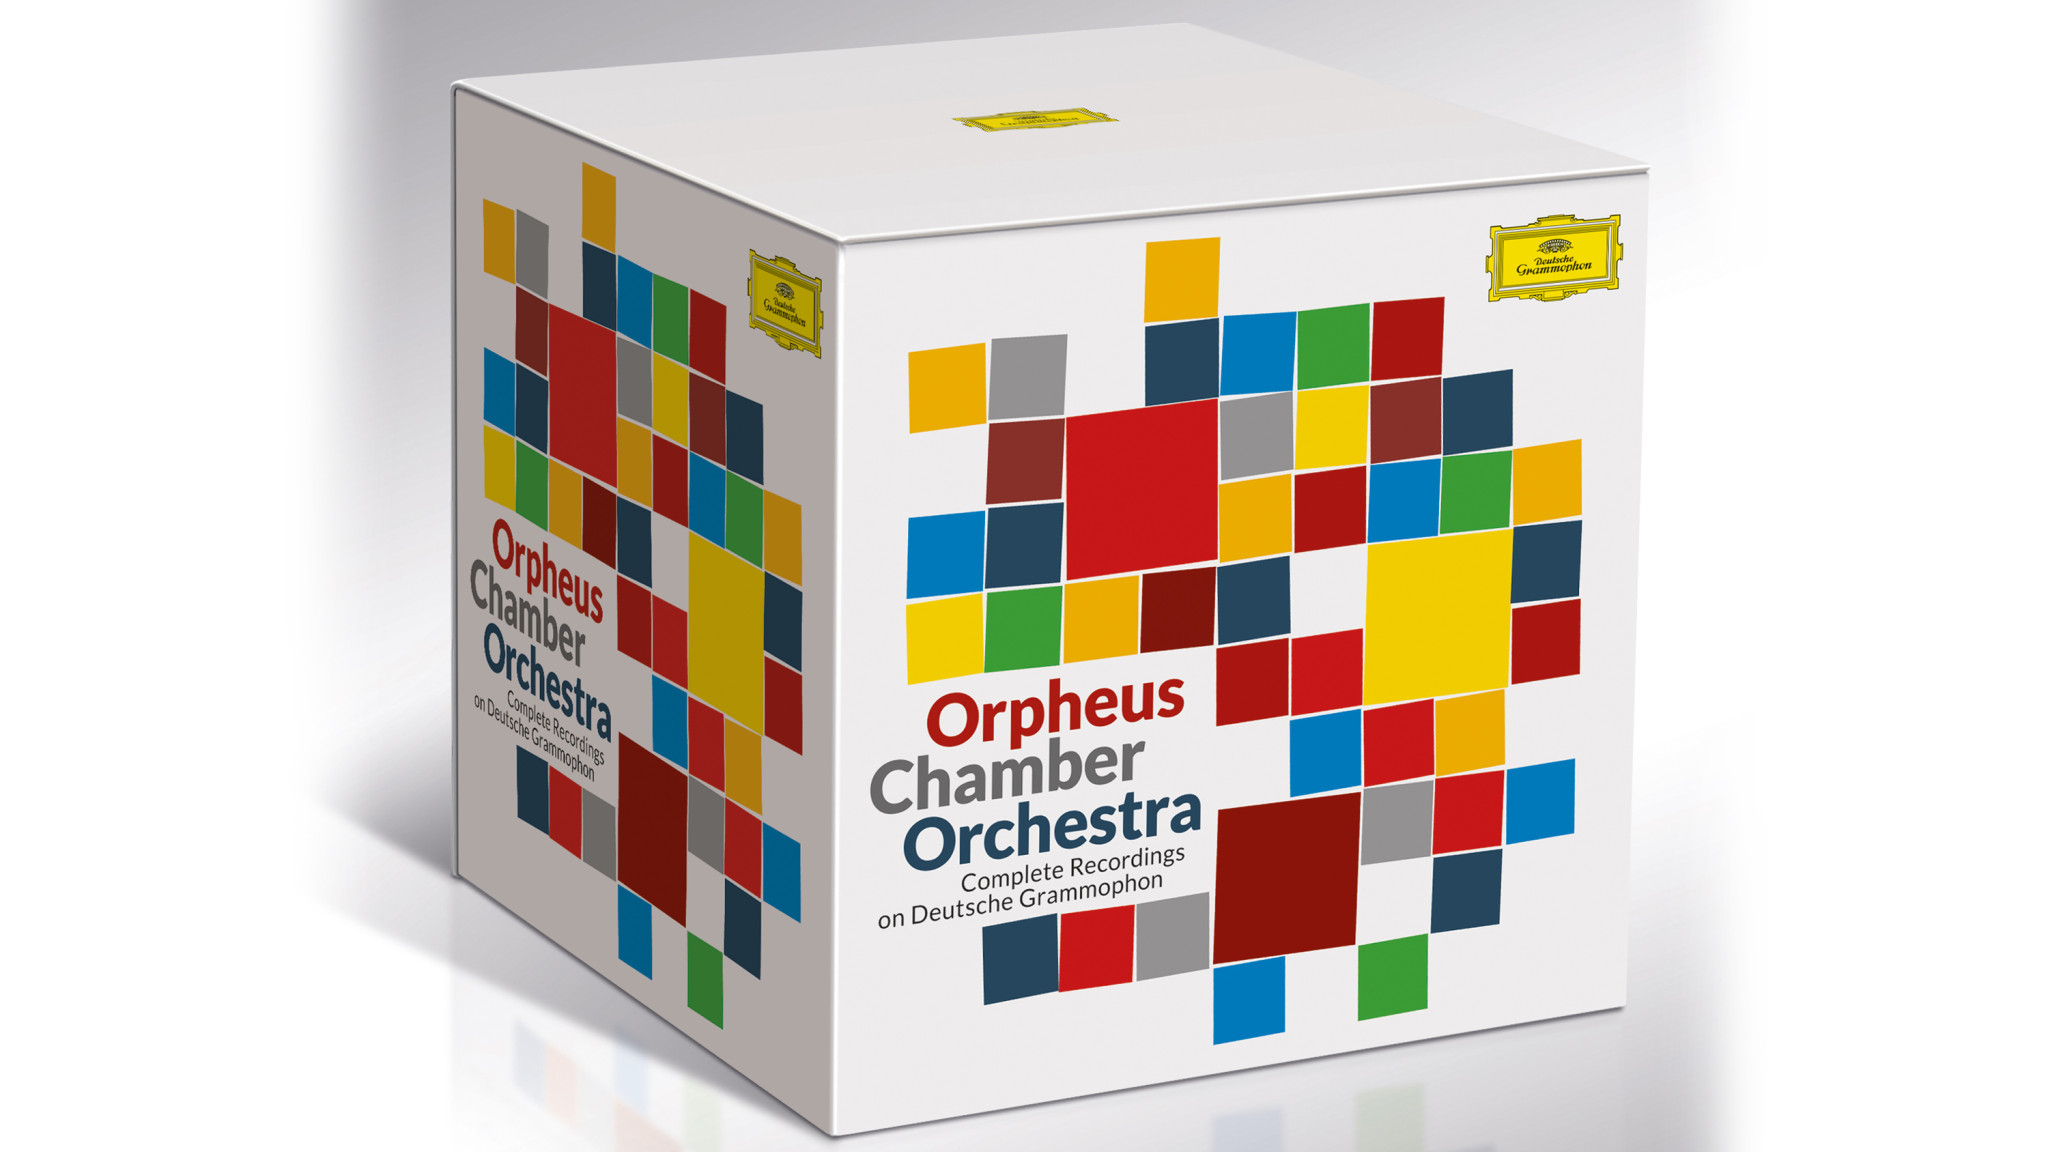 Orpheus Chamber Orchestra present their Complete Recordings on DG